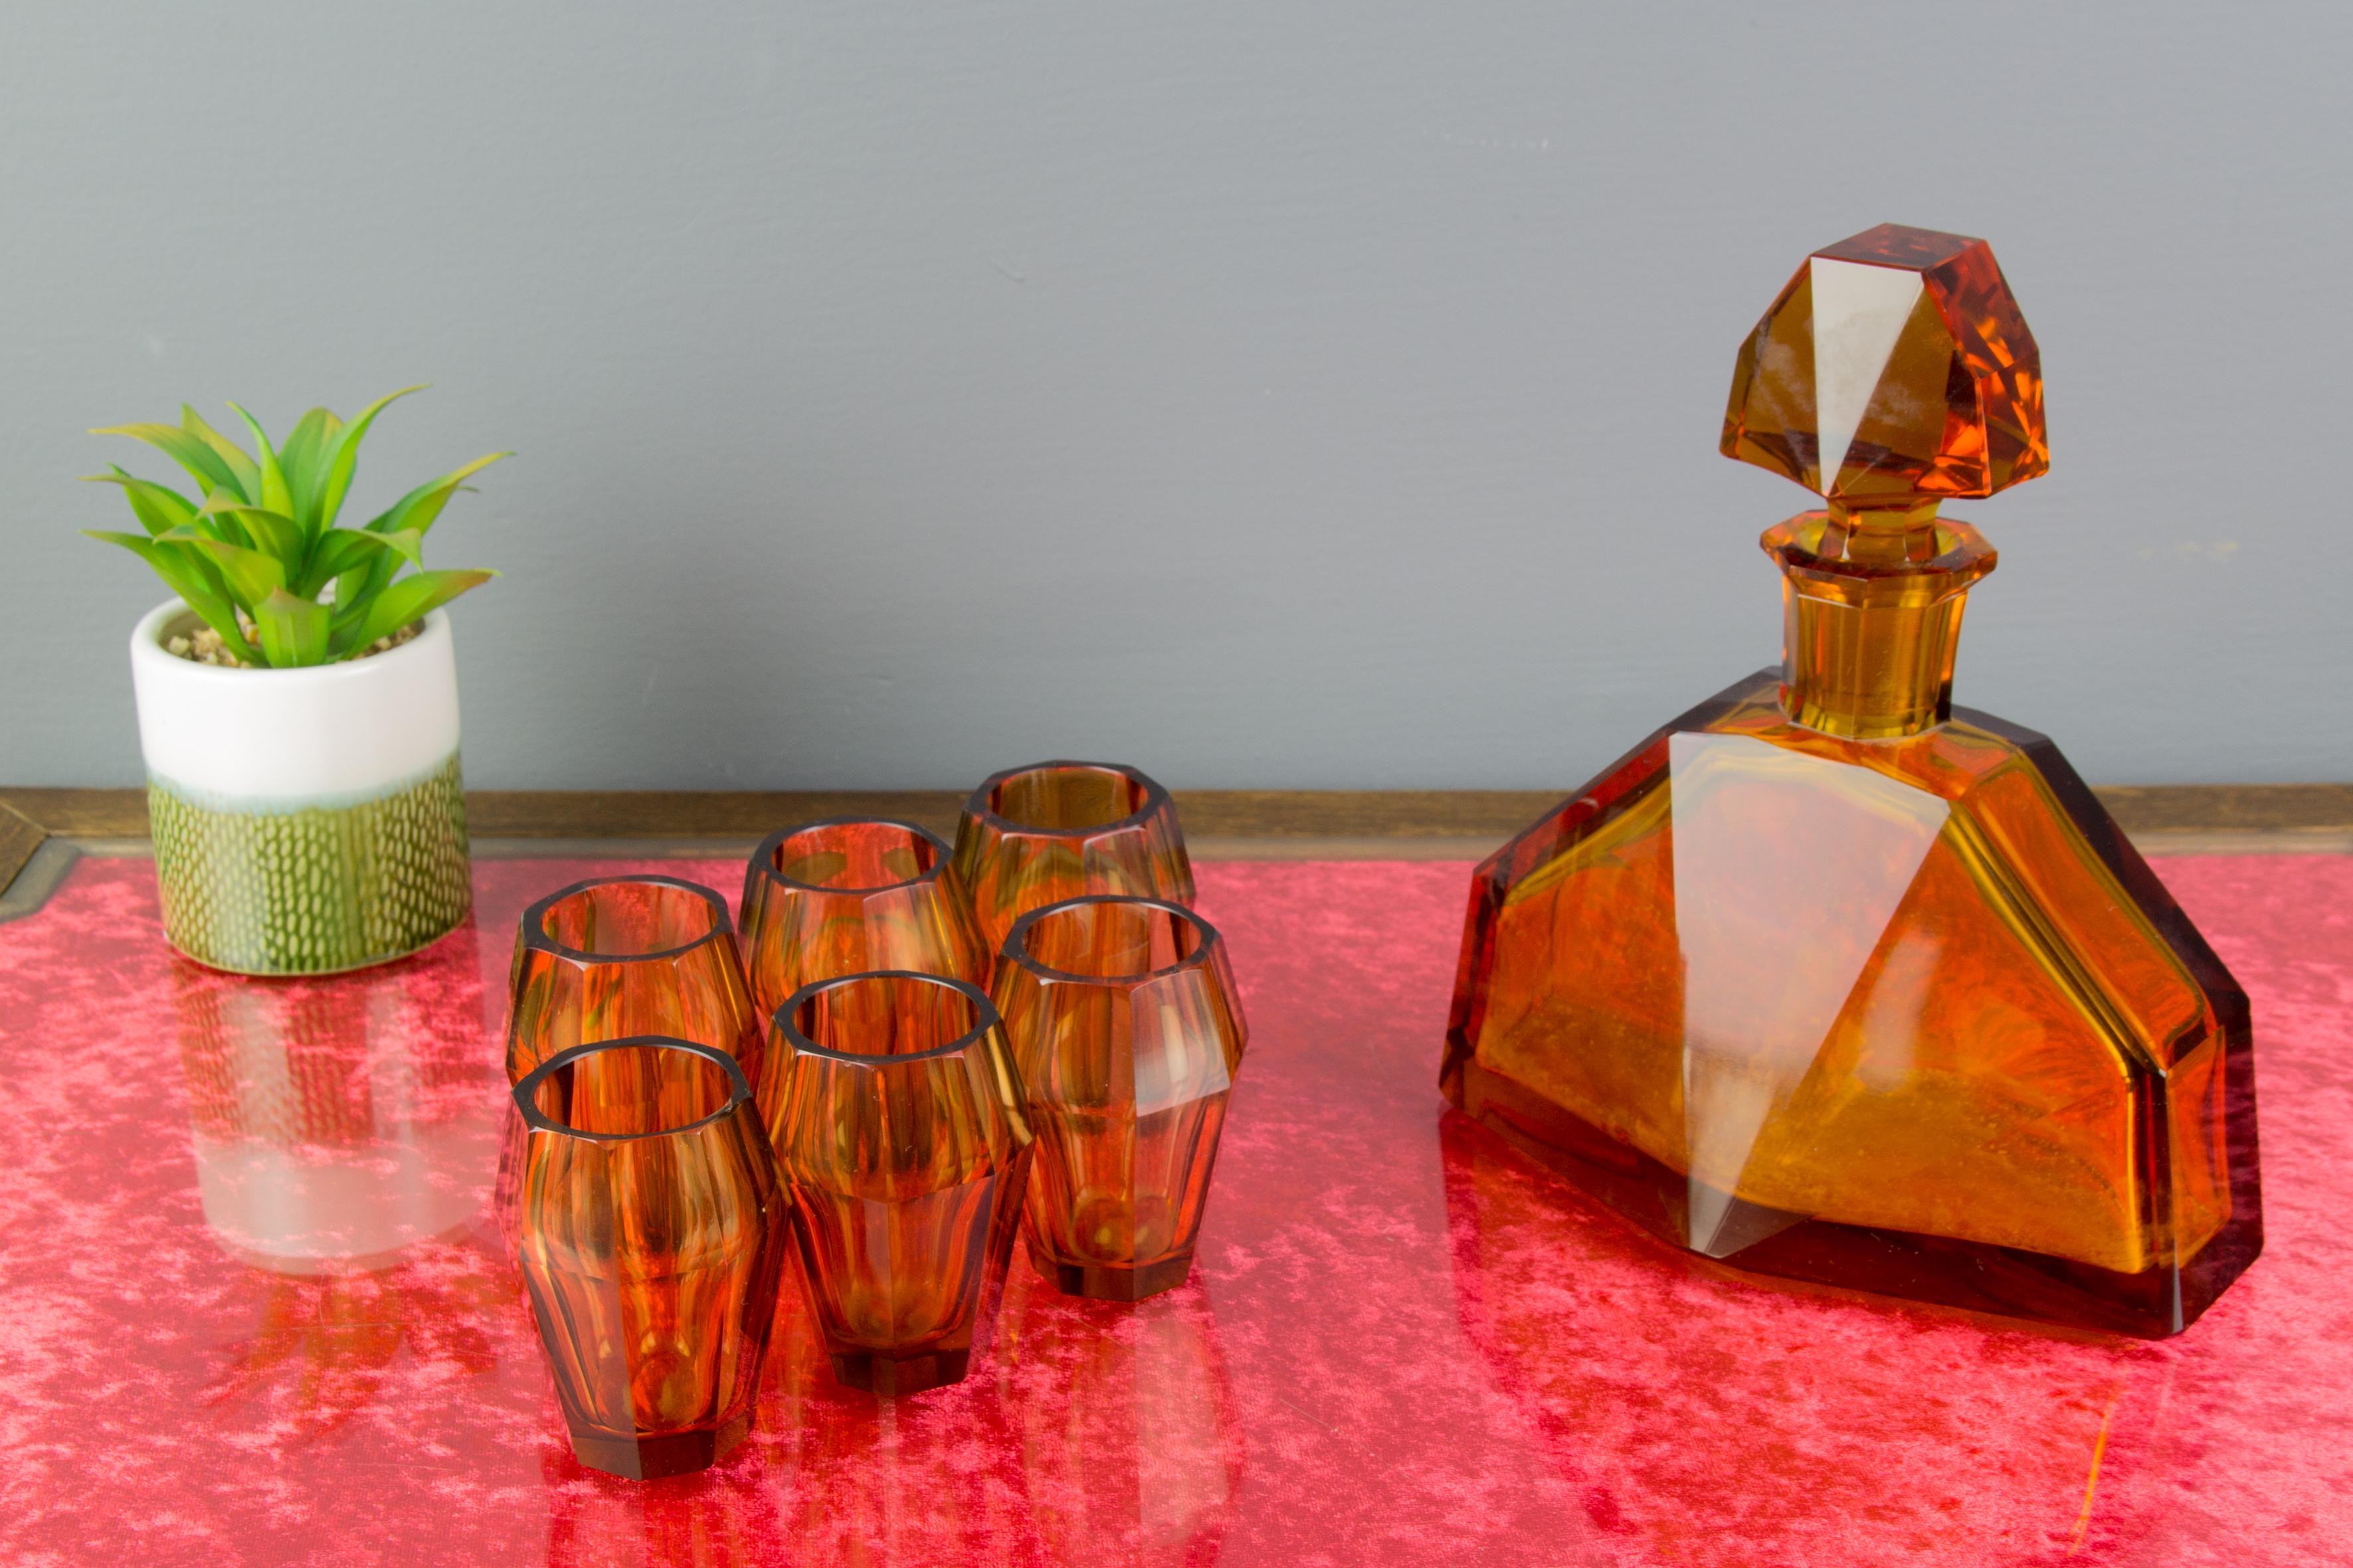 Czech Art Deco Amber Colored Bohemian Glass Decanter and 6 Glasses Set, 1930s